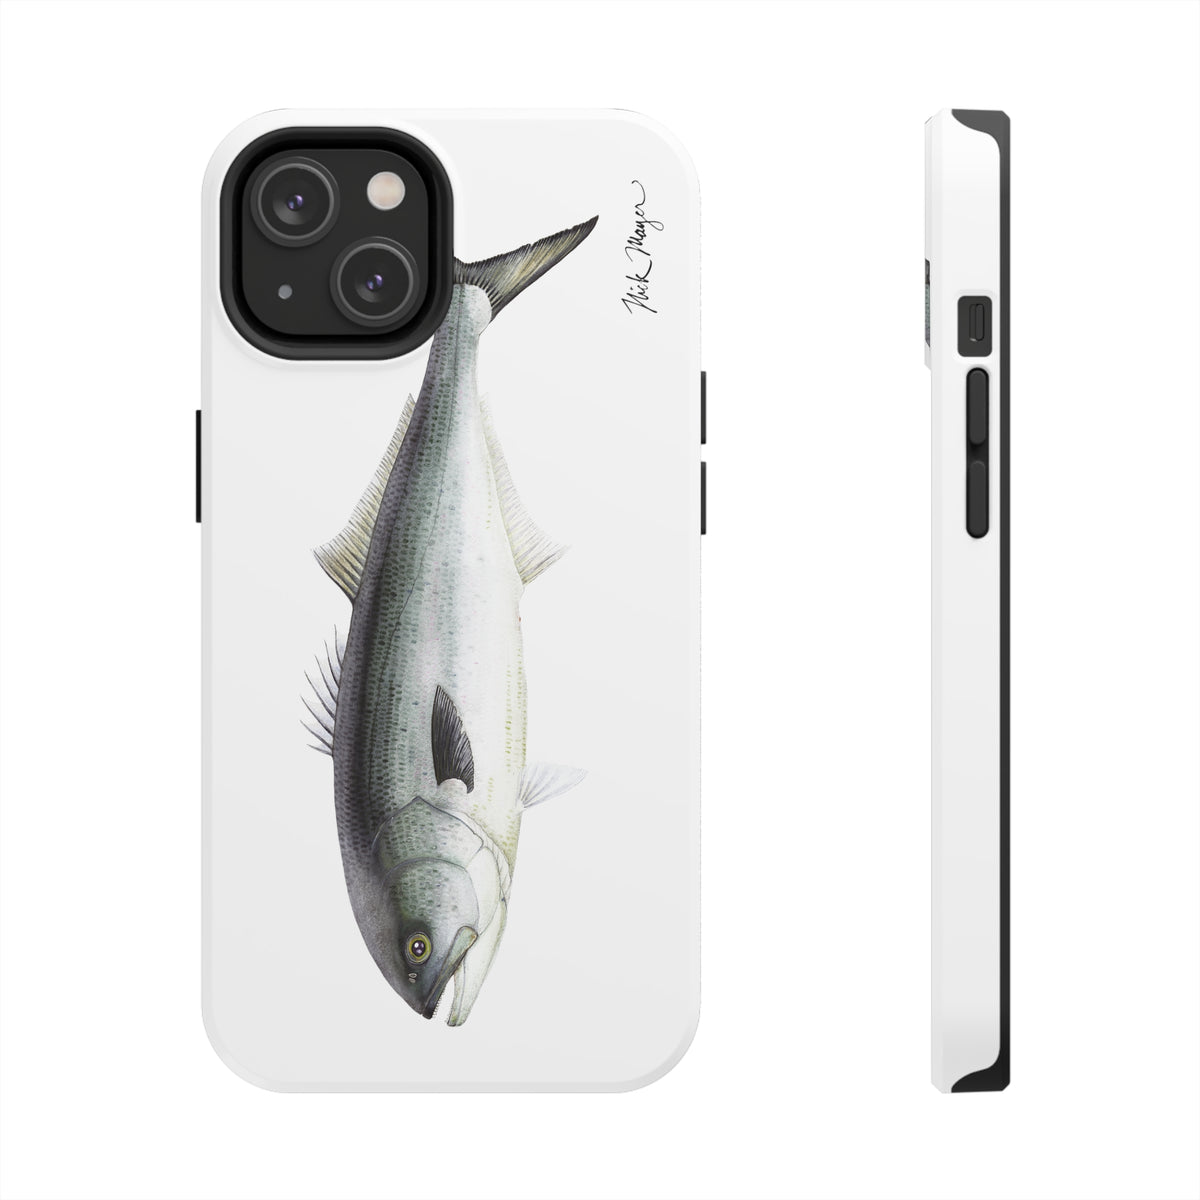  iPhone XR Pull Me If You Can Zander Hooks Lures Expert Walleye  Fishing Case : Cell Phones & Accessories